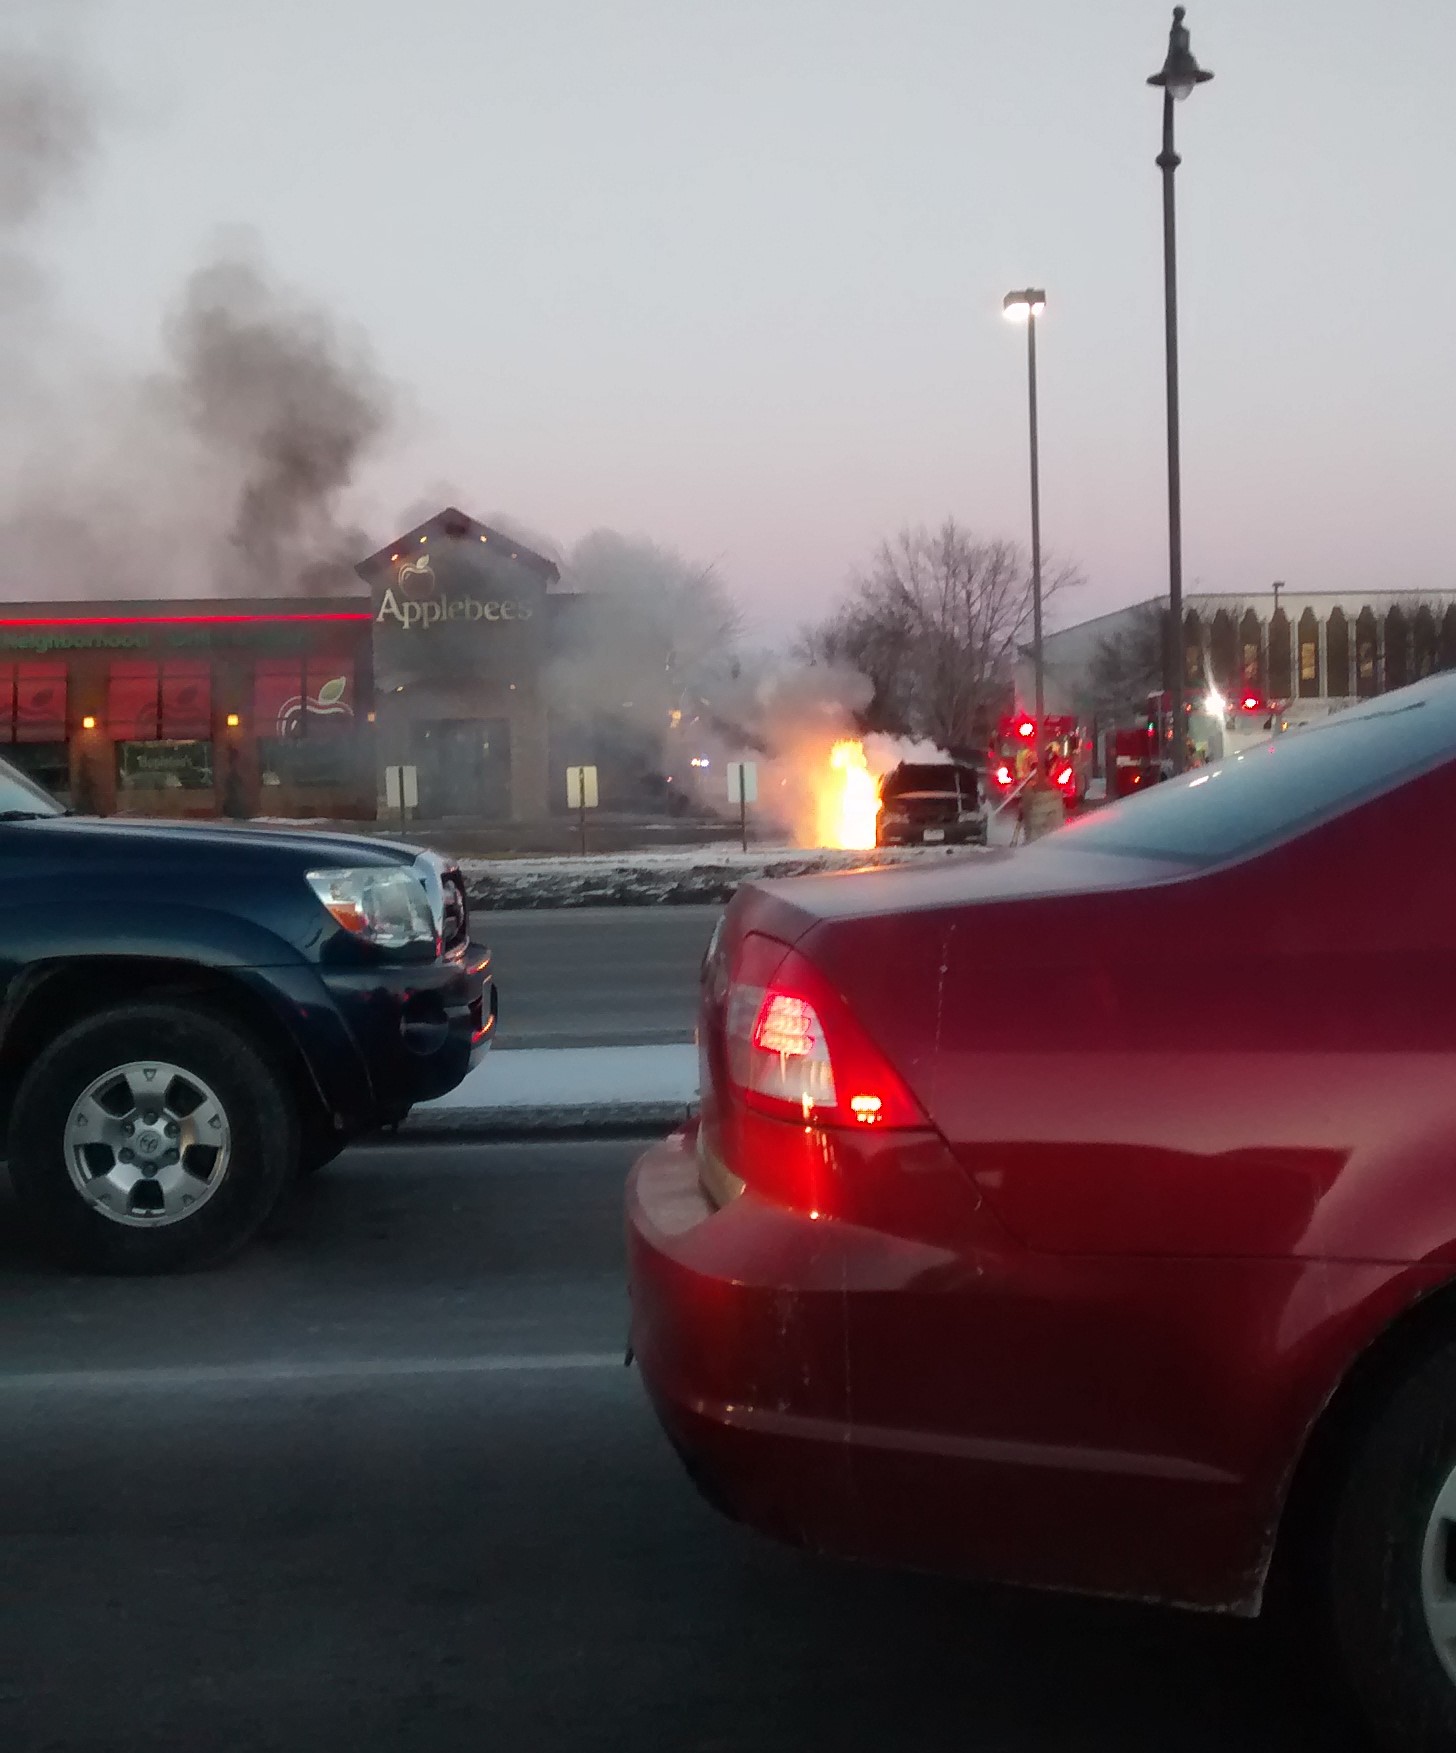 A car on fire in front of an Applebees.  Cars are patiently waiting in line to turn at a stoplight.  The scene has the feeling of the Wizard of Oz, Pay no attention to the man behind the curtain 